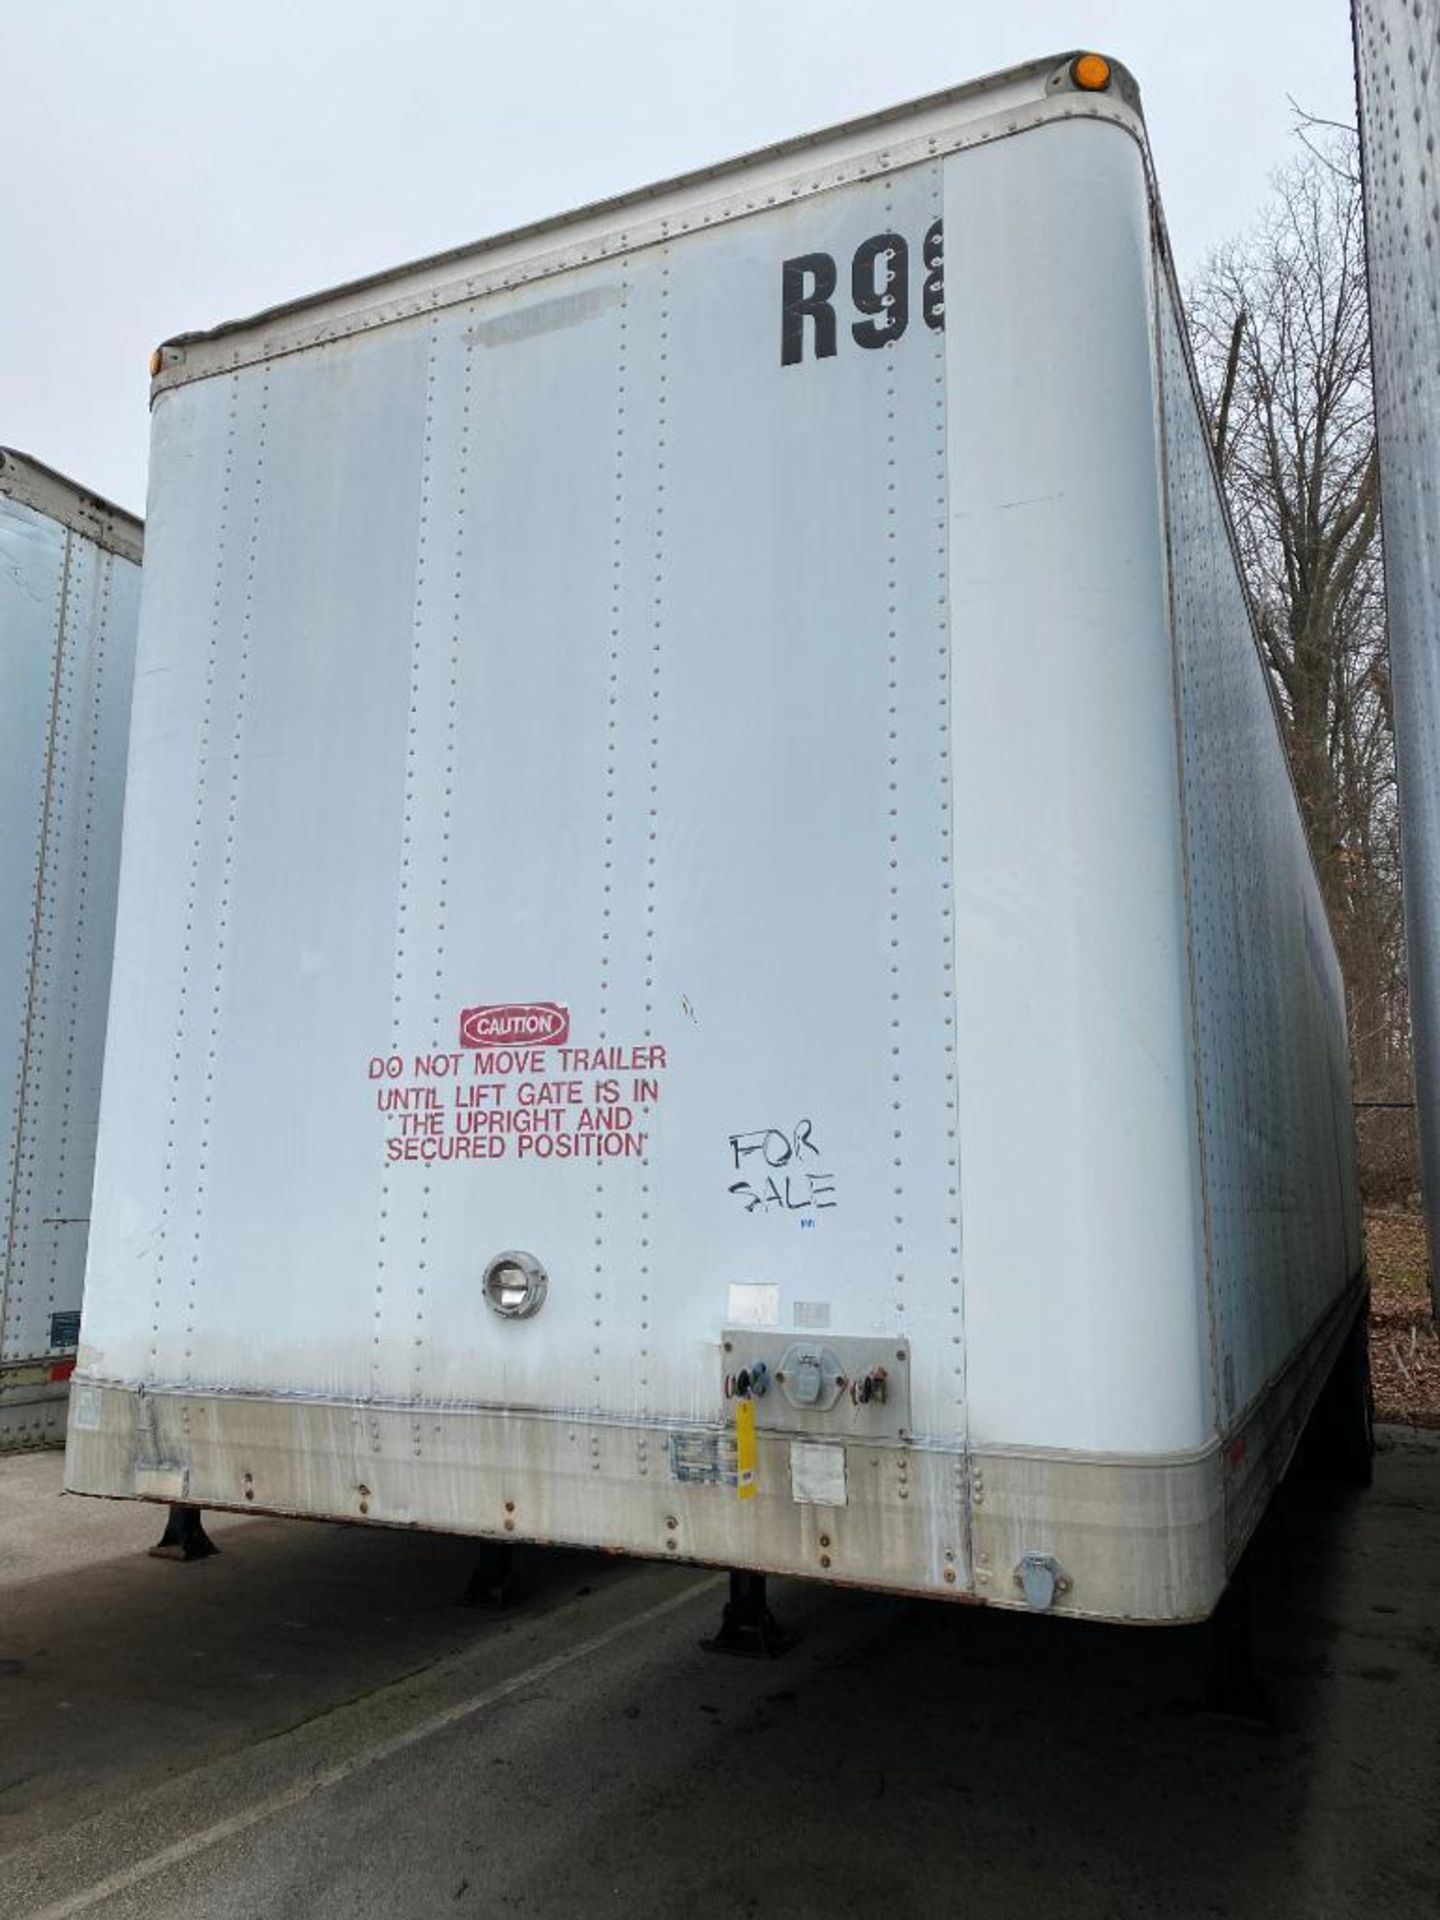 1998 TRAILMOBILE DRY VAN TRAILER, 40', VIN 1PT01AAK8W9010220, WITH CONTENTS, (NO BIG ASS FAN BLADES) - Image 3 of 10